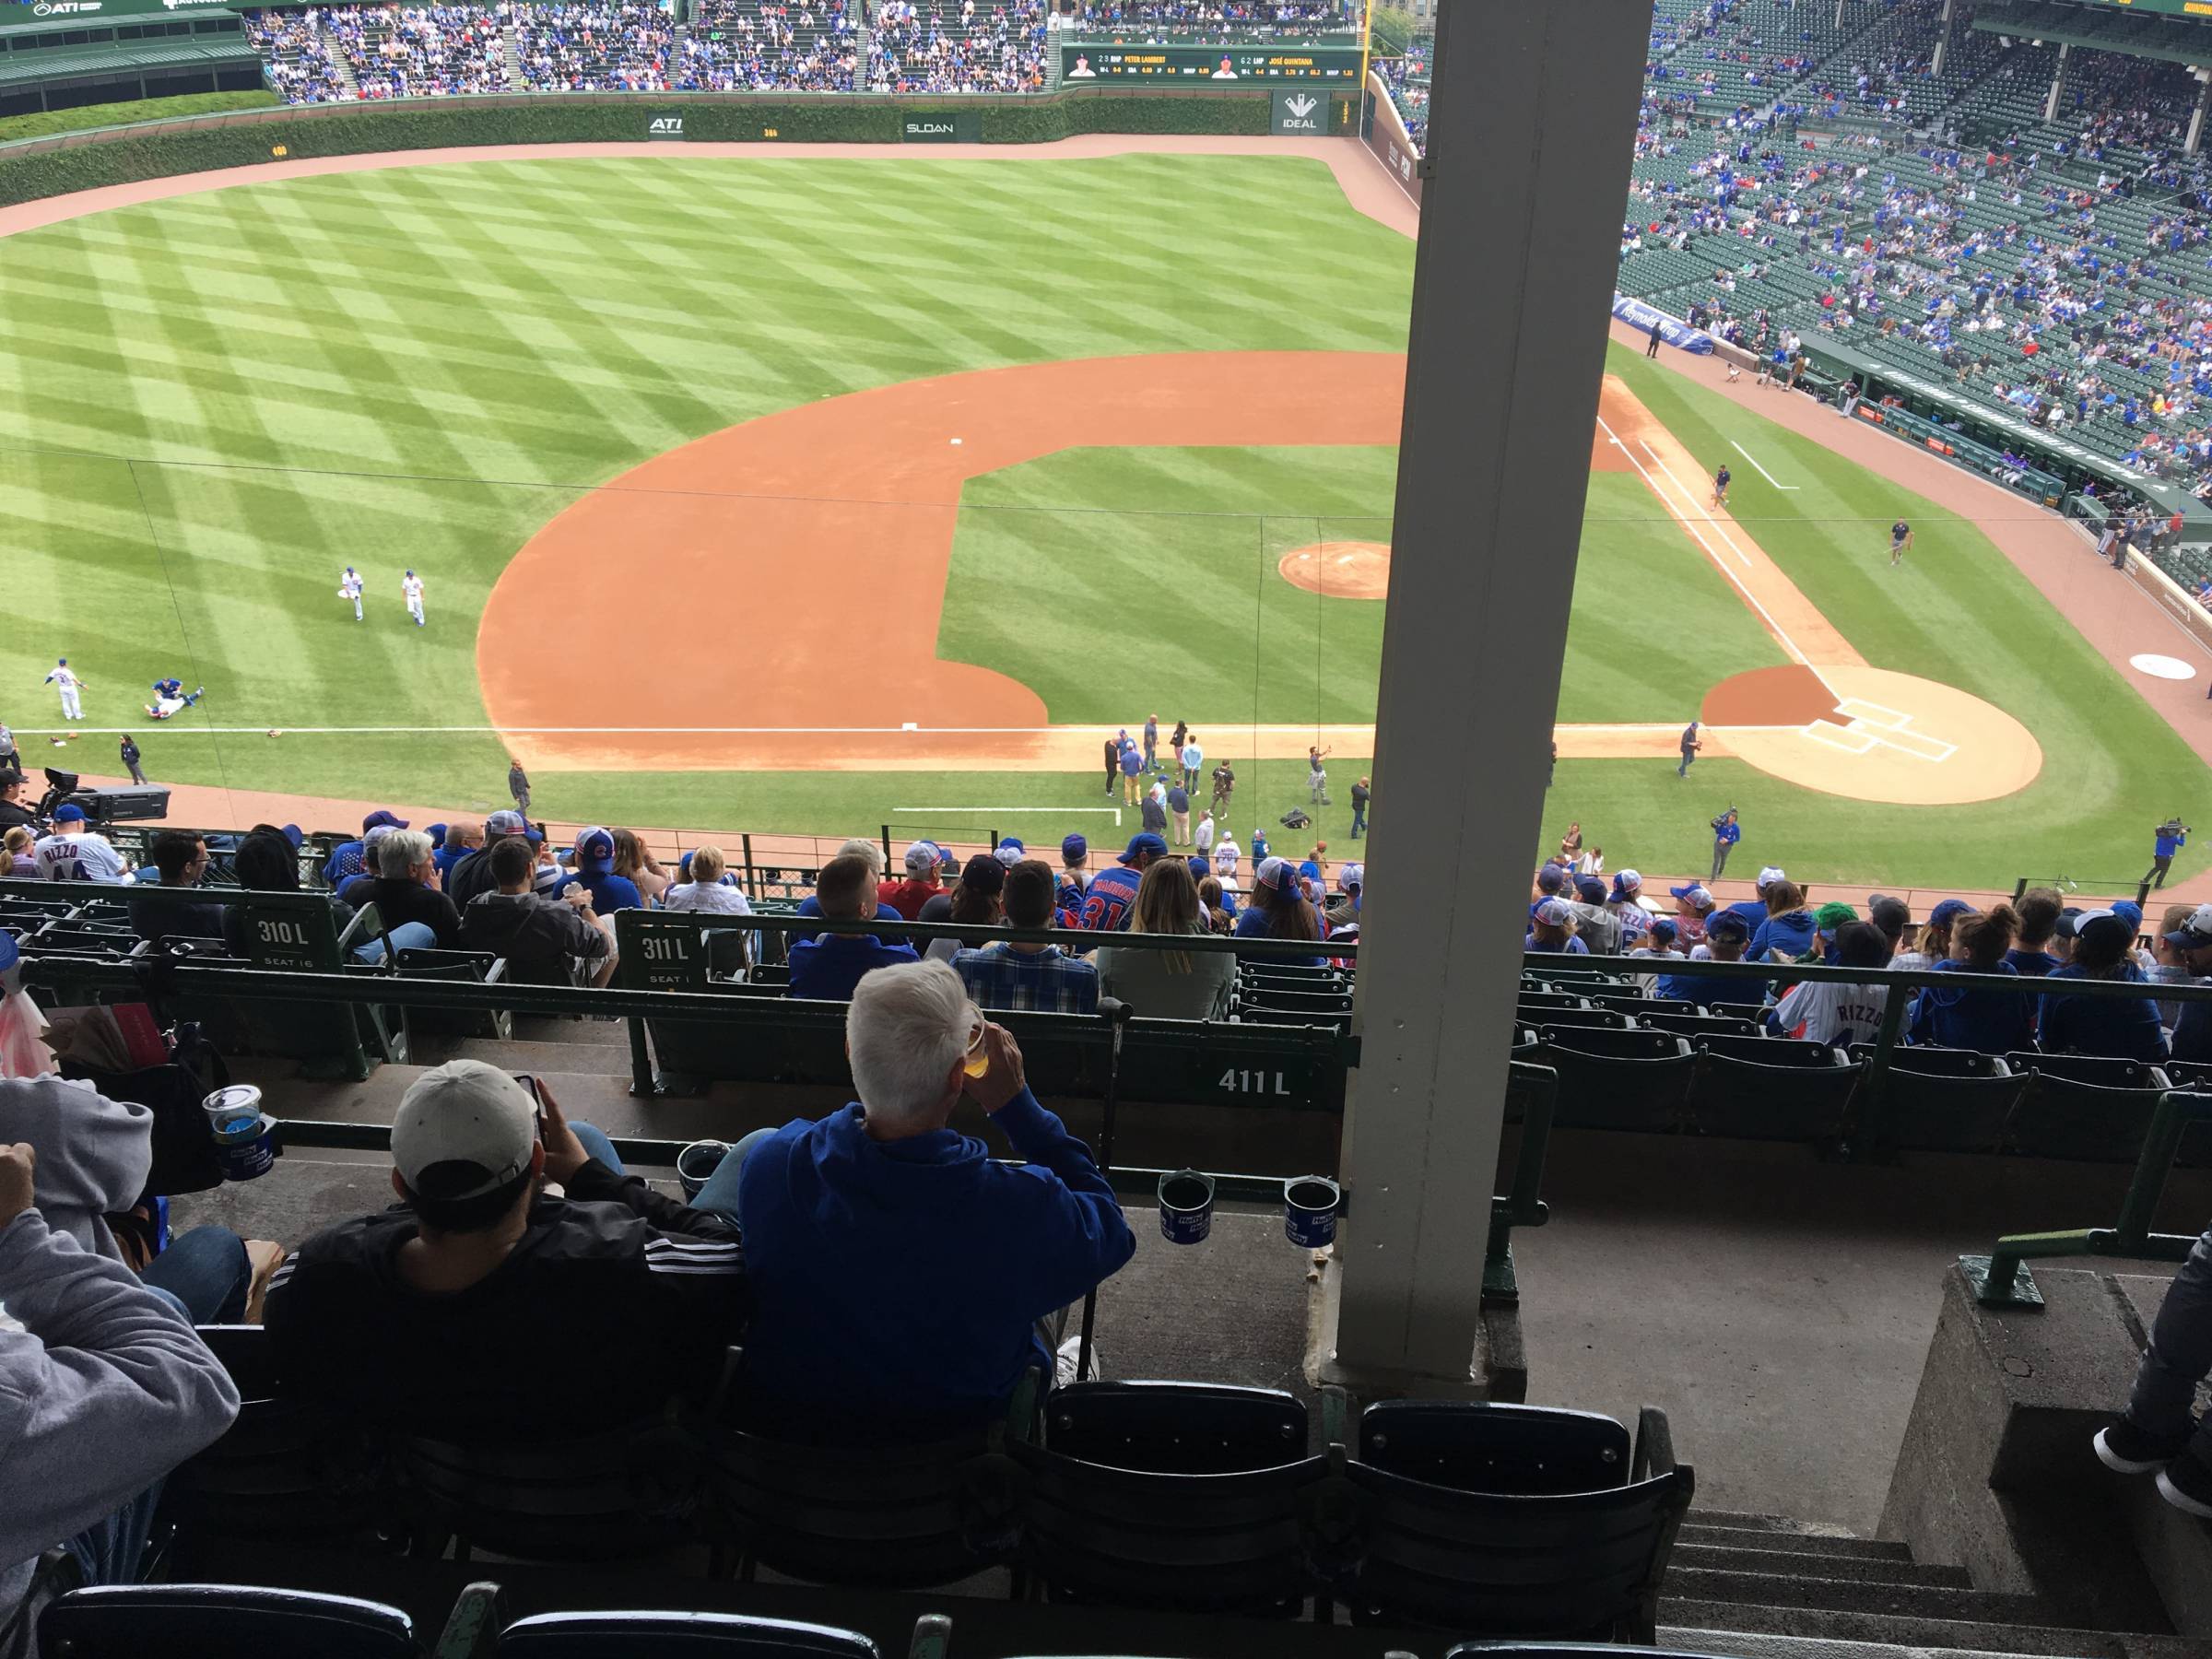 Pole in Section 411L at Wrigley Field